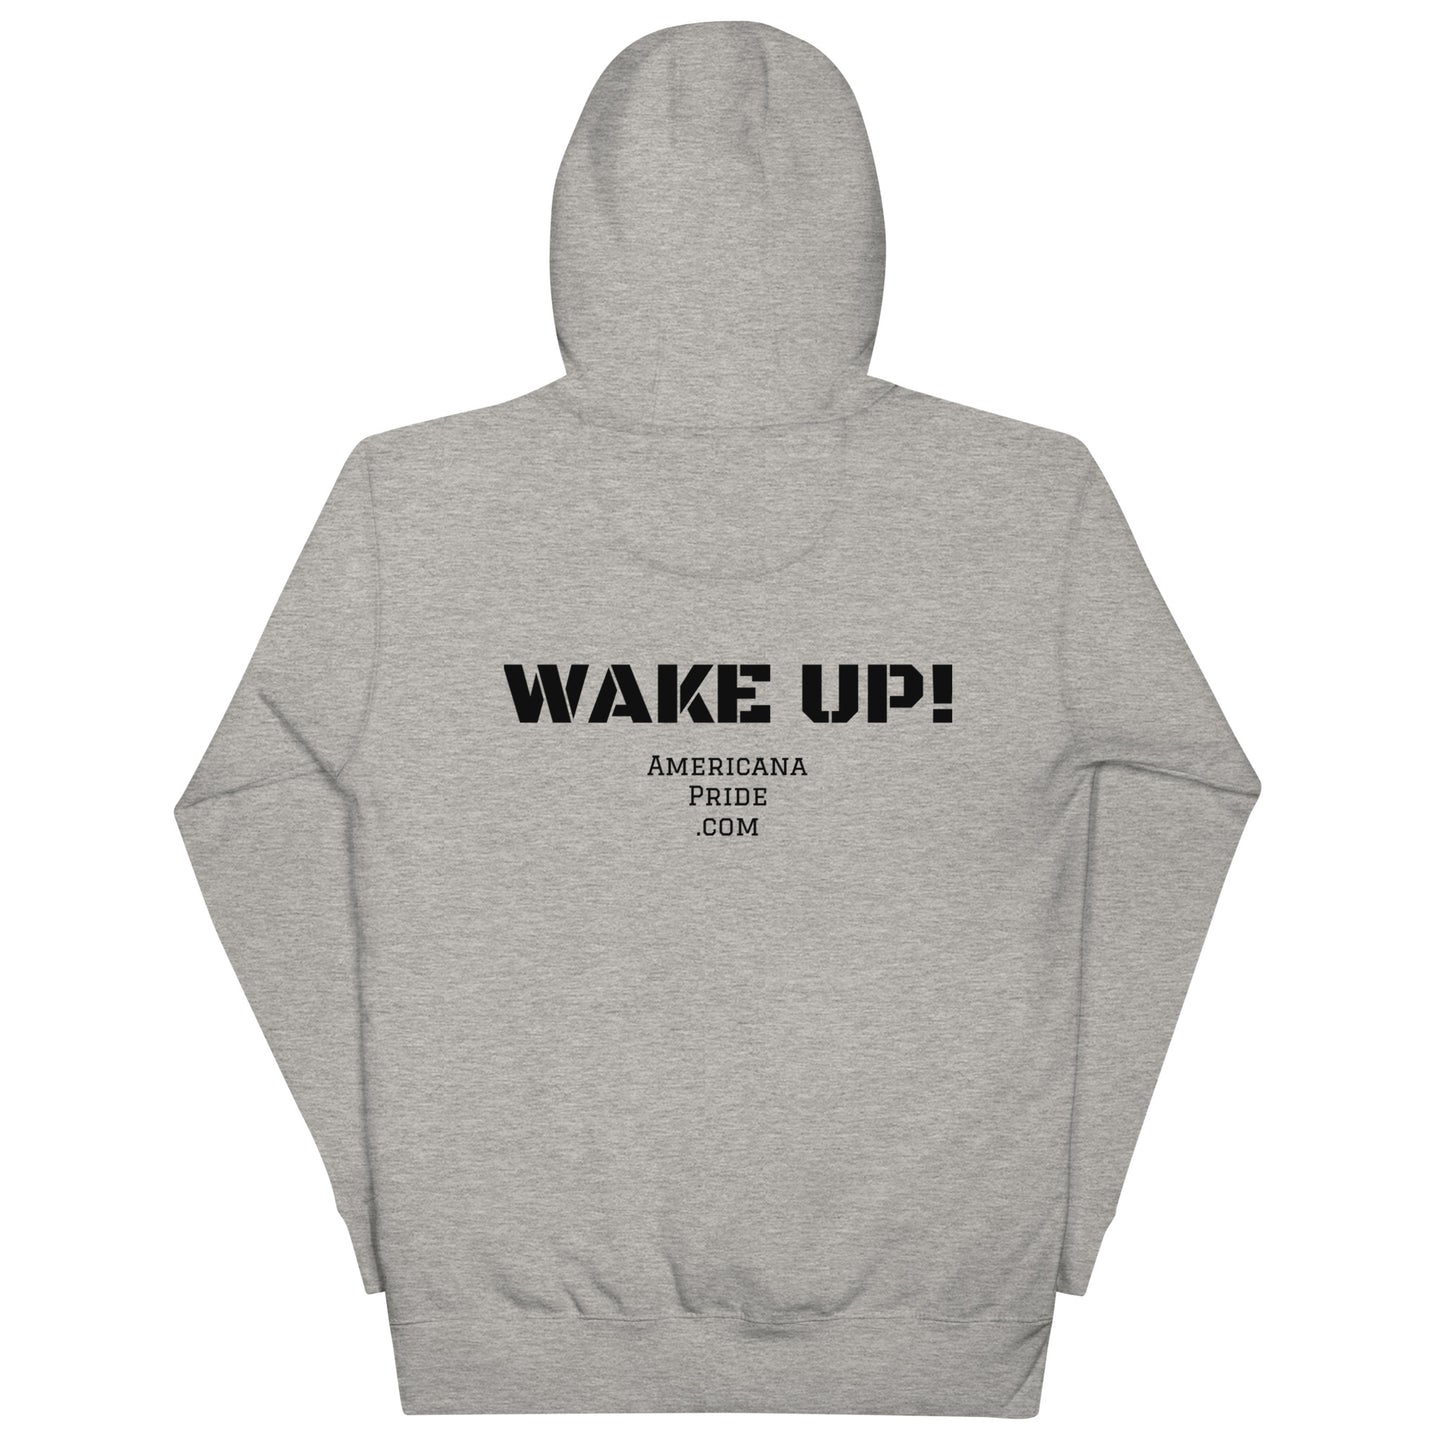 If you are not part of the Movement you are the movement - wake up! Unisex Hoodie (black lettering)